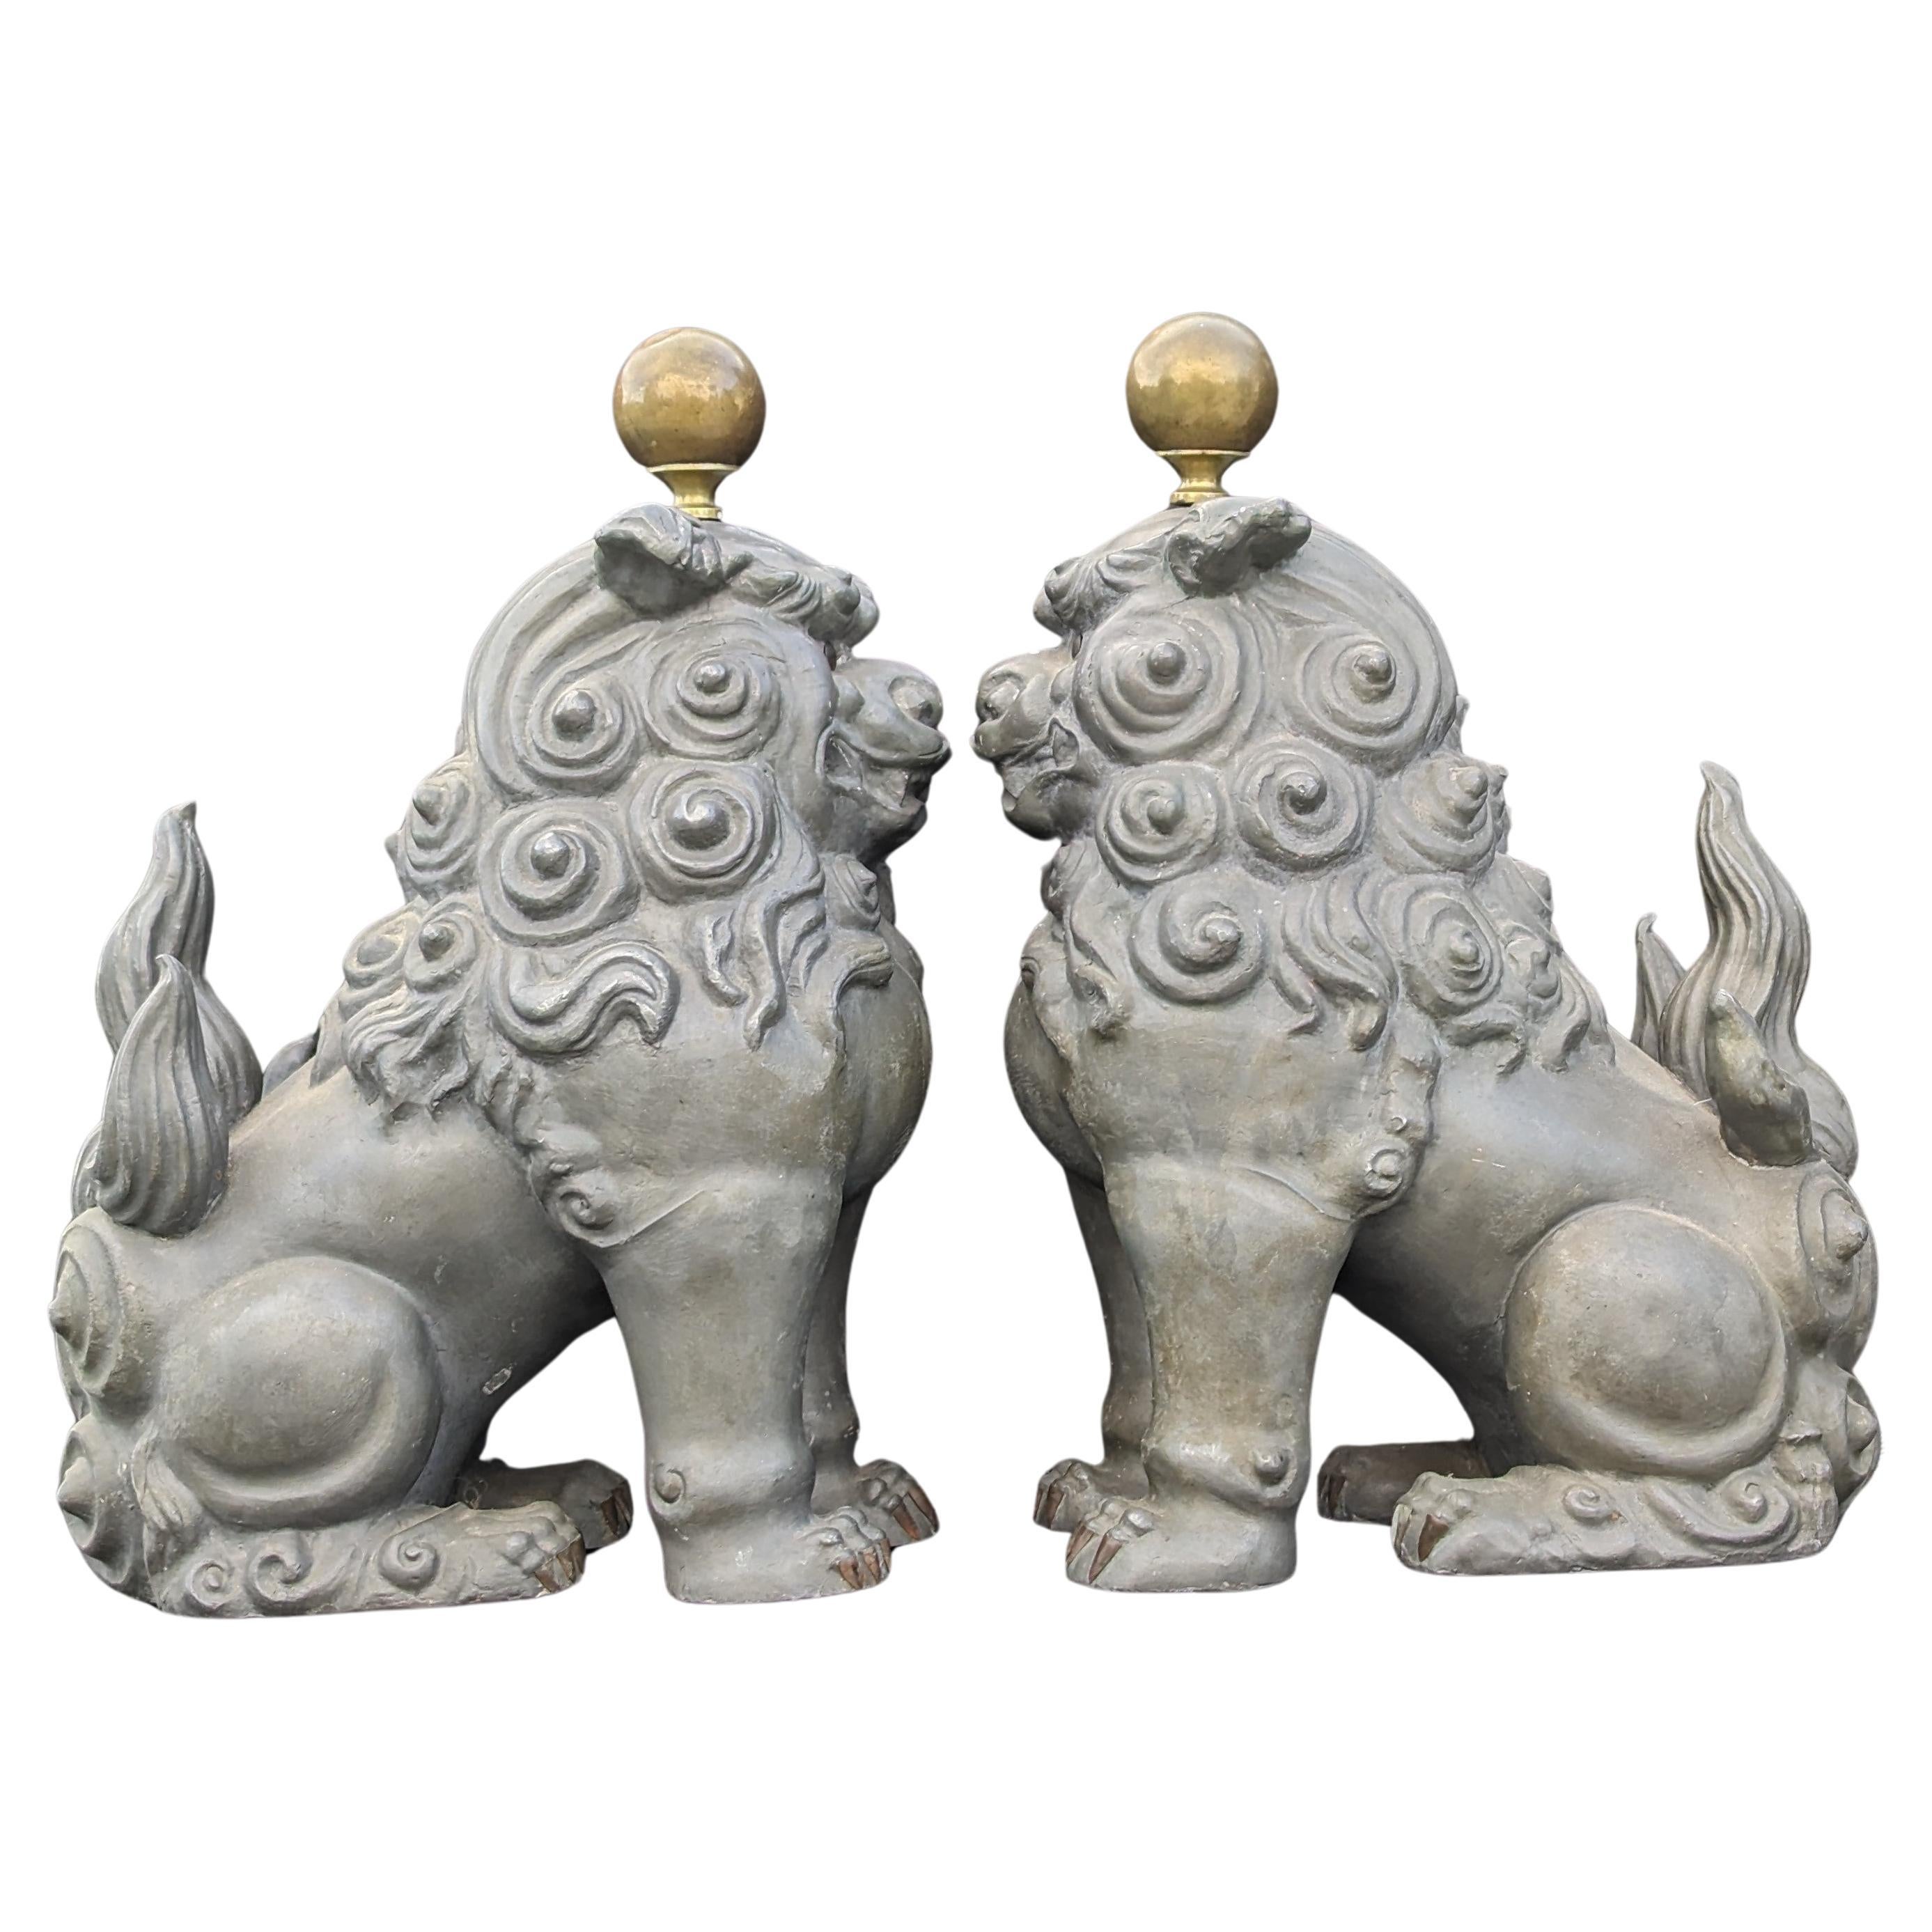 Pair of vintage Chinese pewter guardian lions, in fierce sitting pose, with copper accents for sharp claws, and each topped with an adjustable height brass ball attached by a threaded rod.

circa: 1950, Mid 20c

Hallmarks: MADE IN HONG KONG and NG